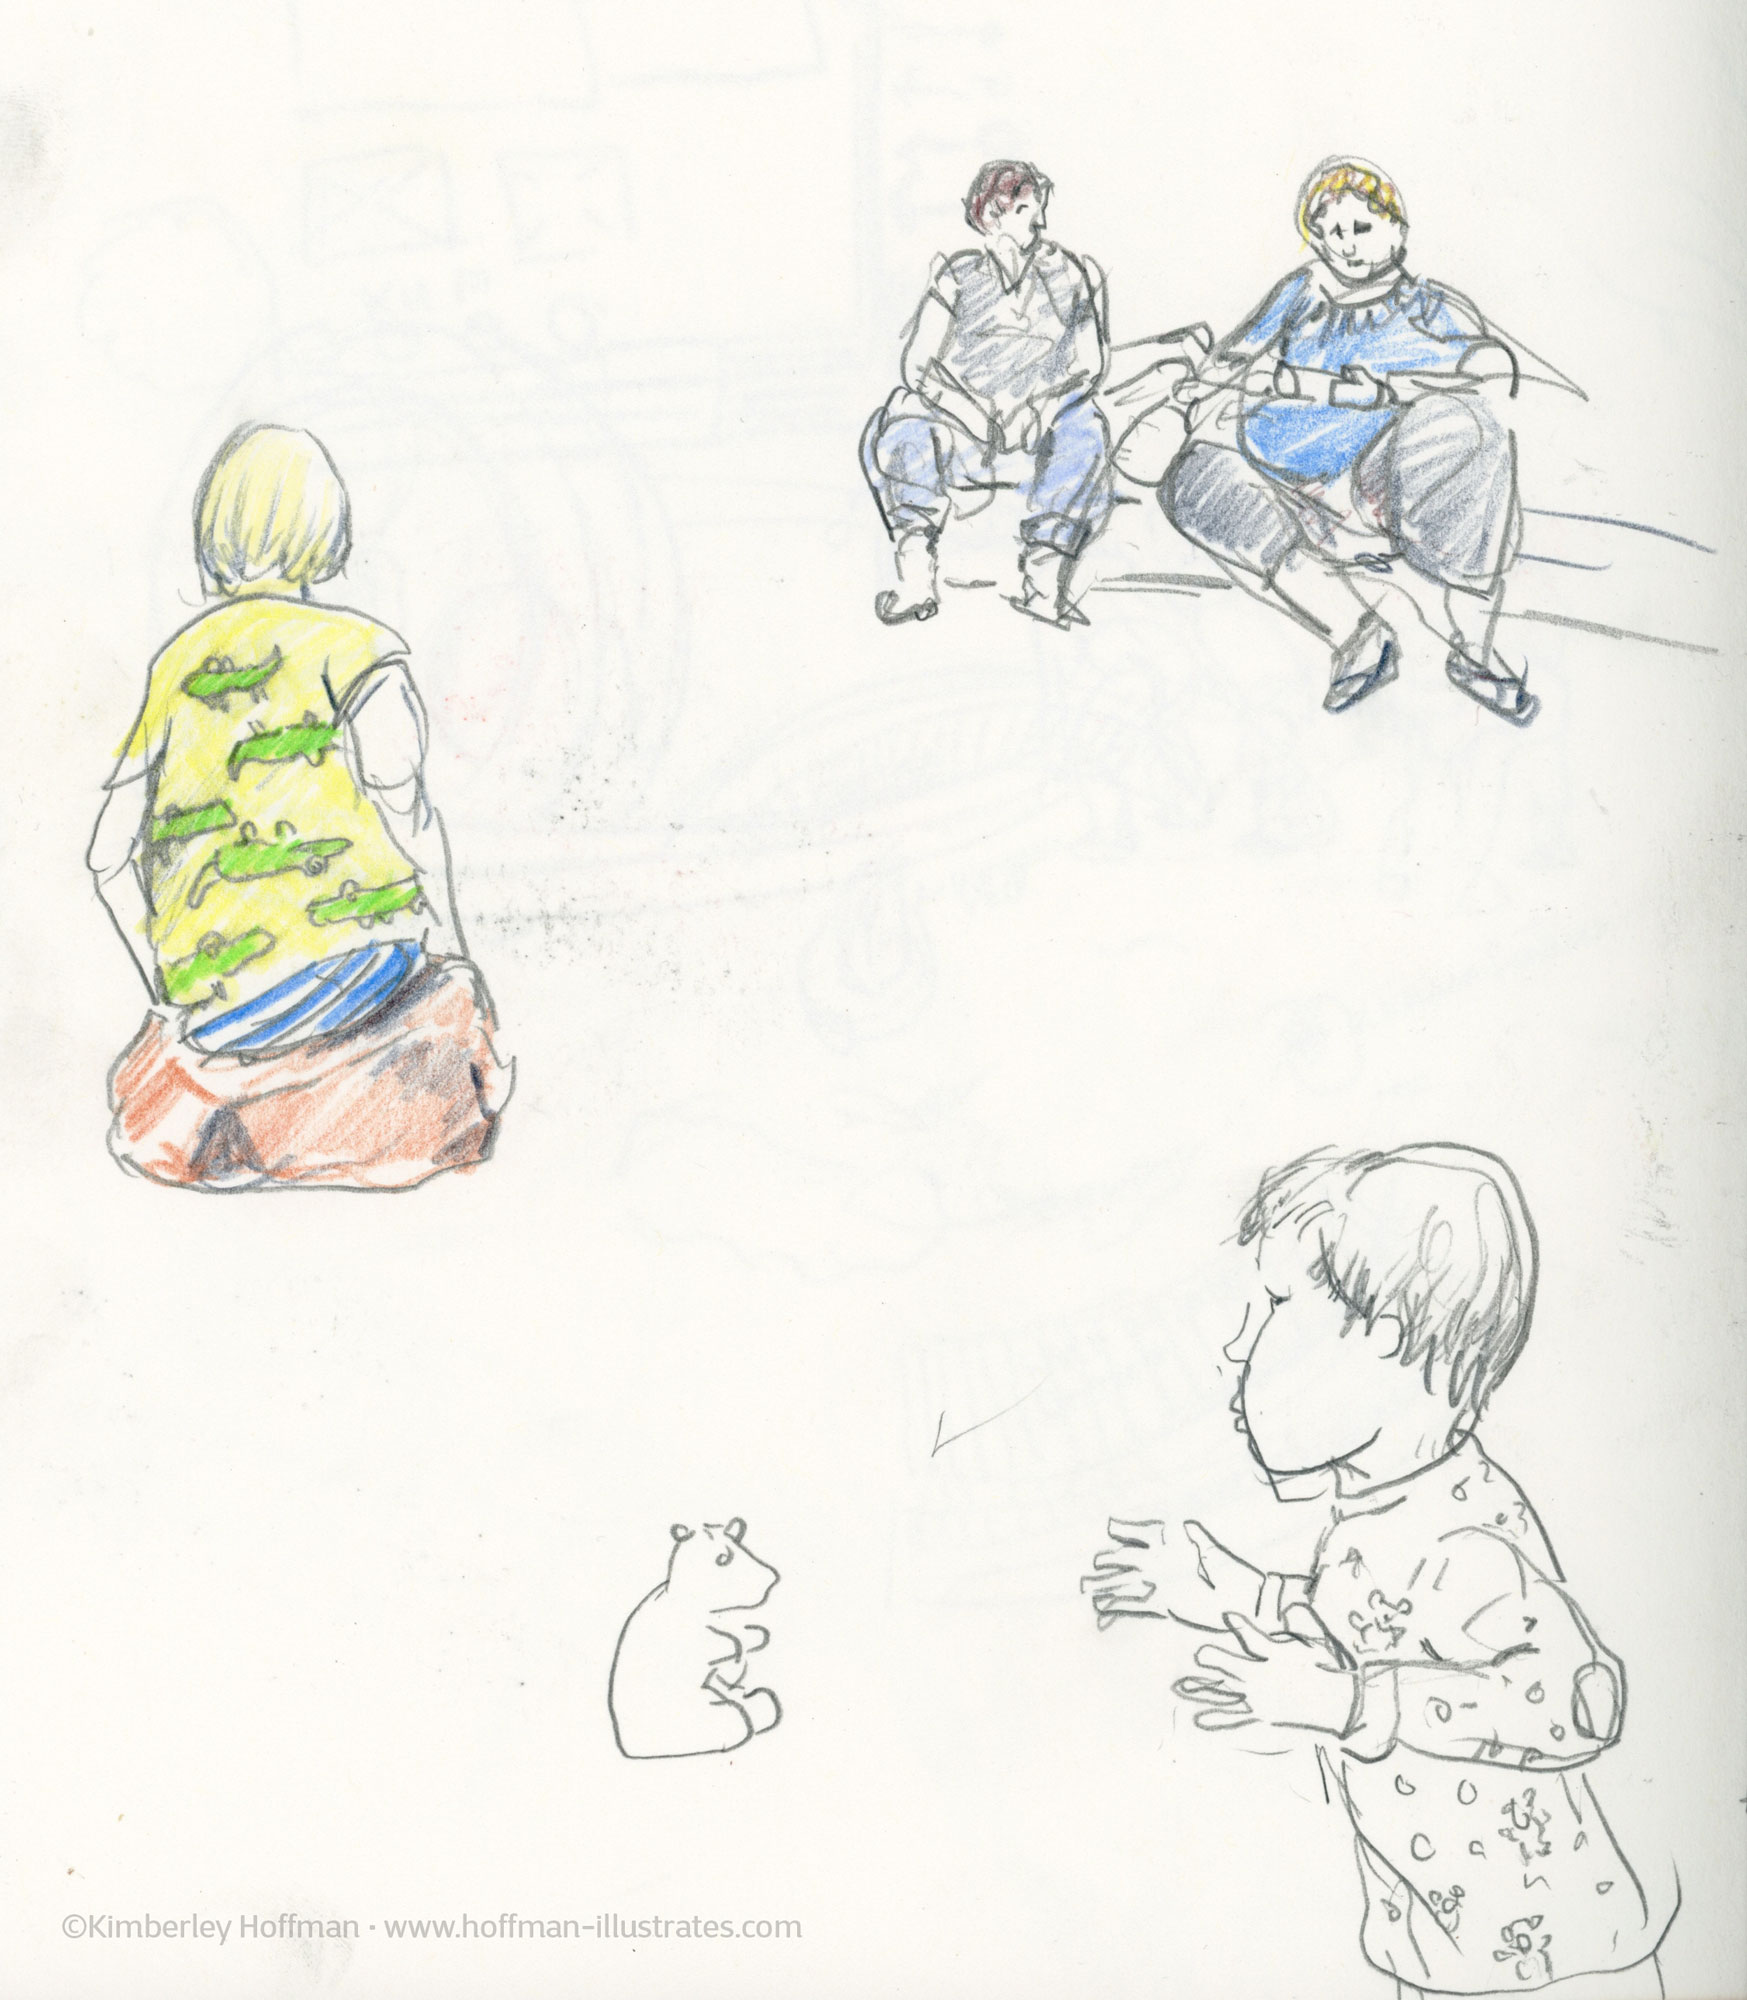 These are graphite and color pencil sketches I made when I was developing the book "Heidelberg wimmelt". There is a child sitting on a rock. It is wearing a yellow shirt with bright green alligators on it. There are two slightly overweight mothers playing with their cell phones in the background sketch. And there is a small child in silhouette in the right bottom corner.